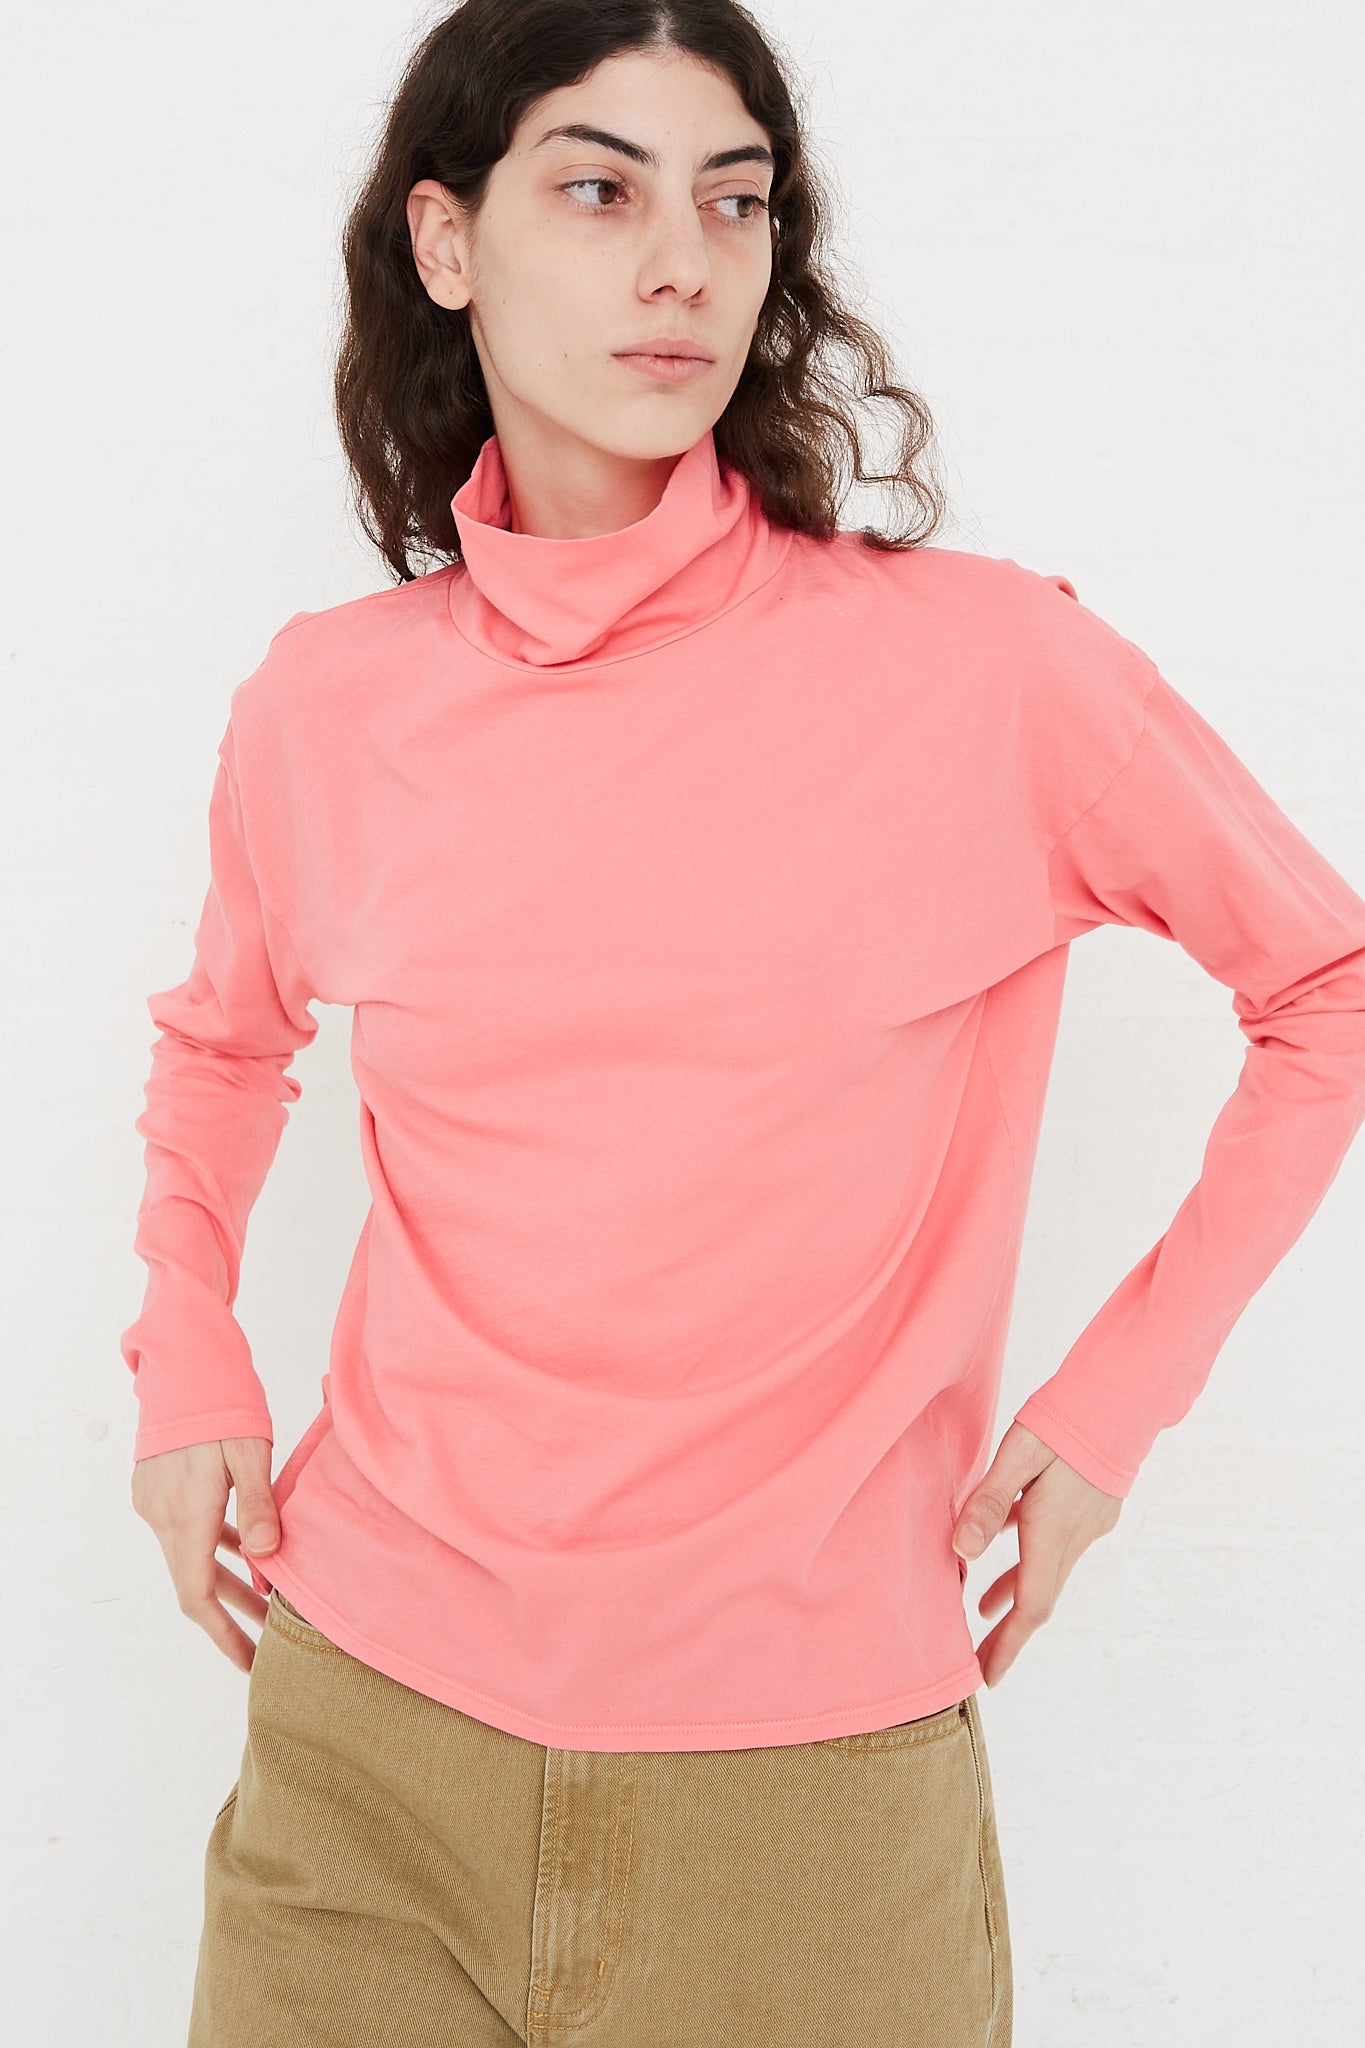 The model is wearing a Cotton Turtleneck Shirt in Calla Pink from the B Sides brand.